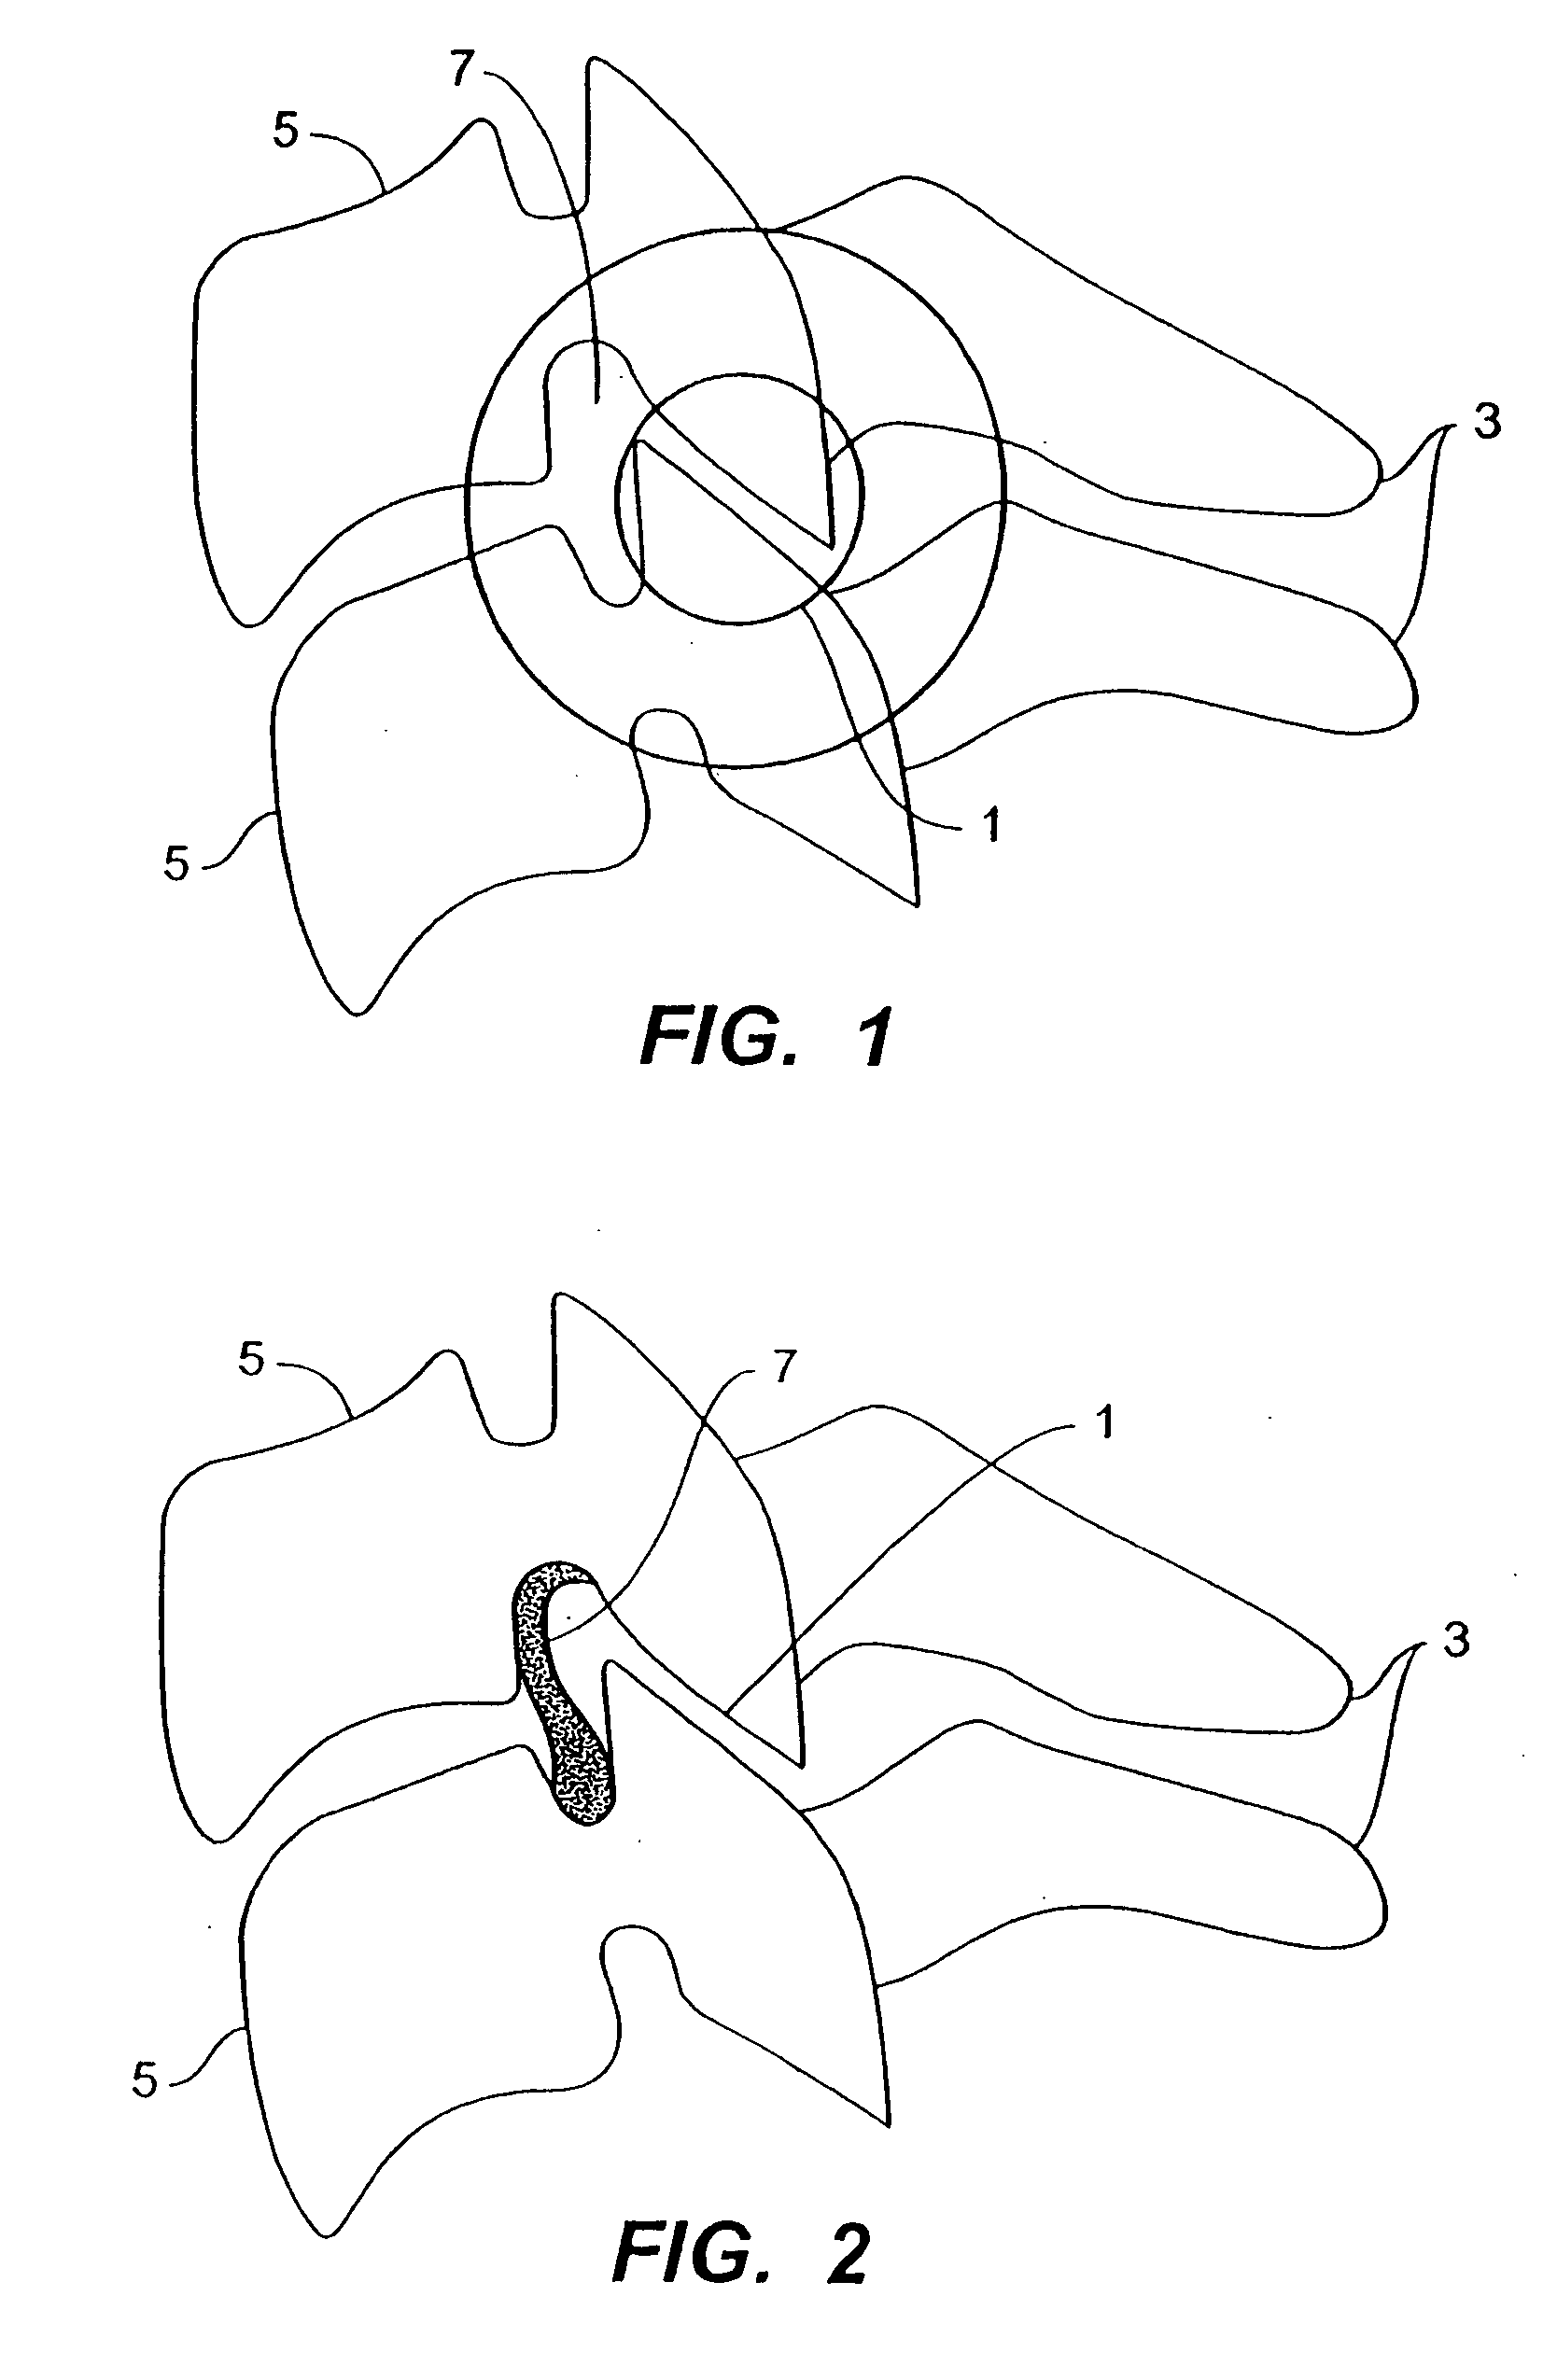 Inter-cervical facet joint implant with locking screw system